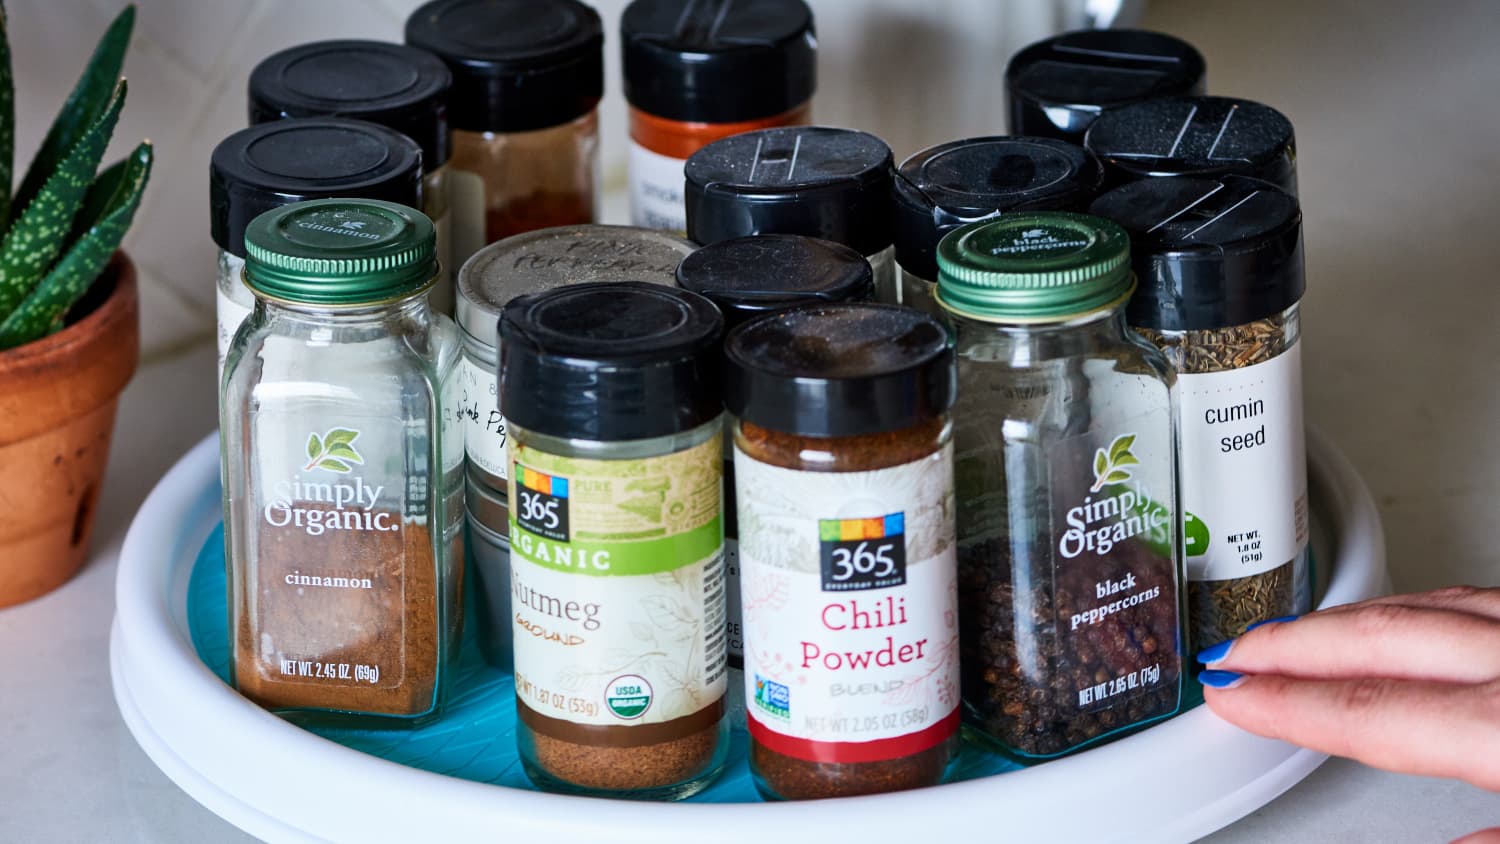 5 Spice Storage Tips (Essential For Keeping Spices Fresh)